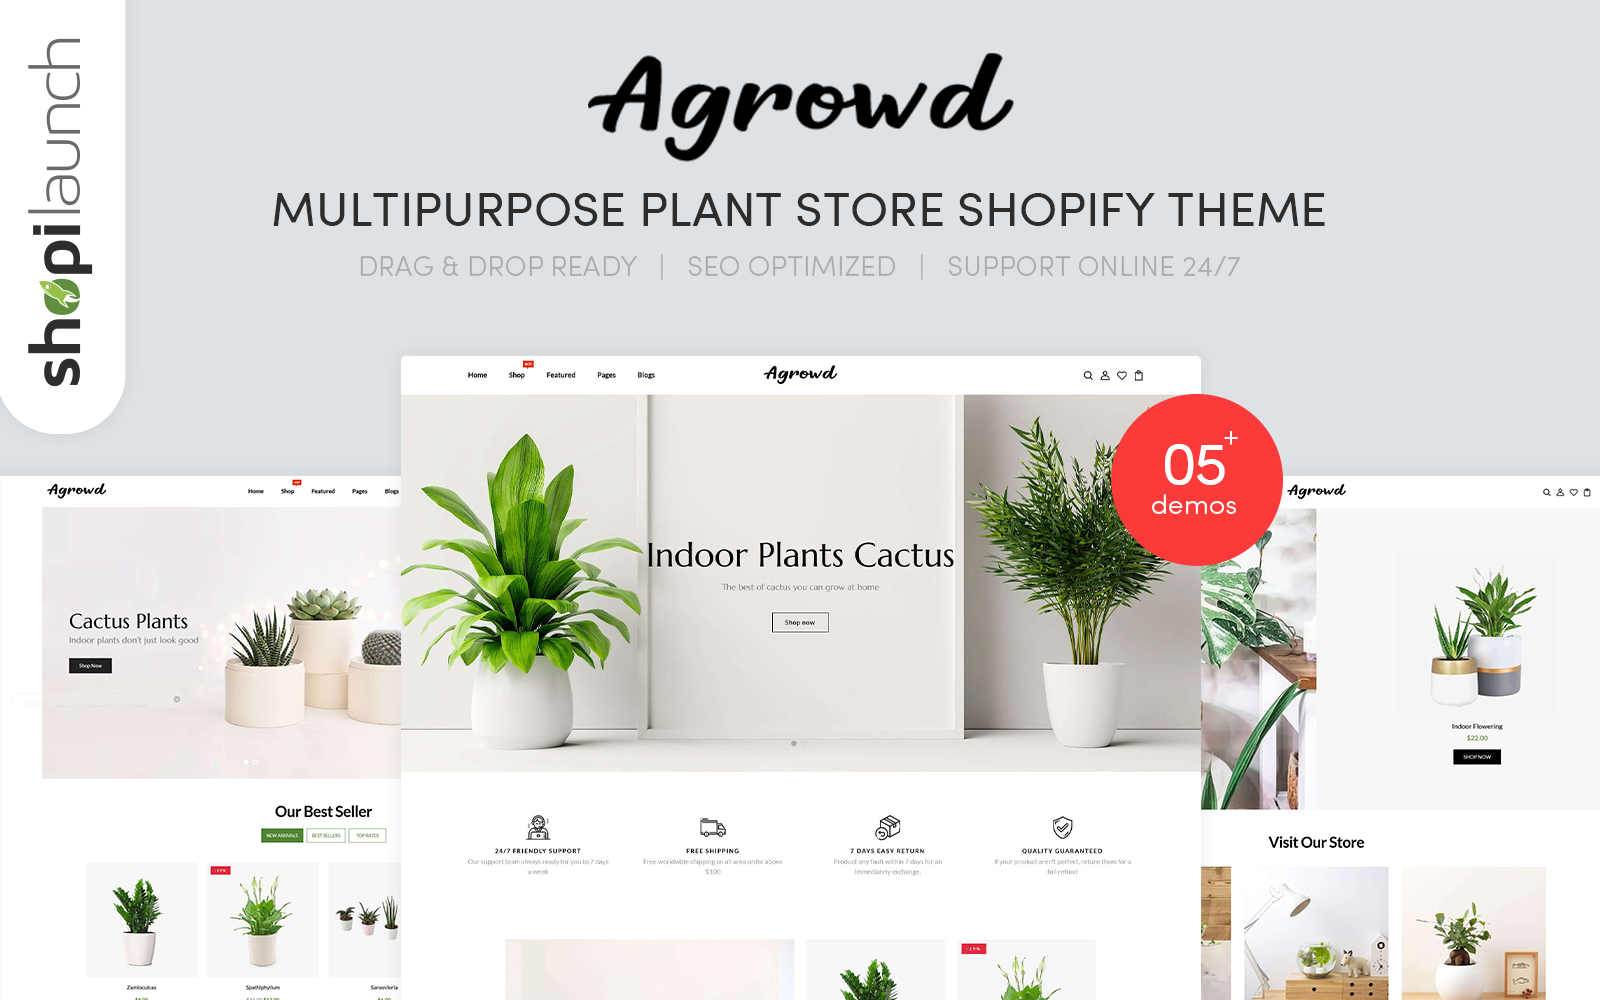 Agrowd - MultiPurpose Plant Store Shopify Theme